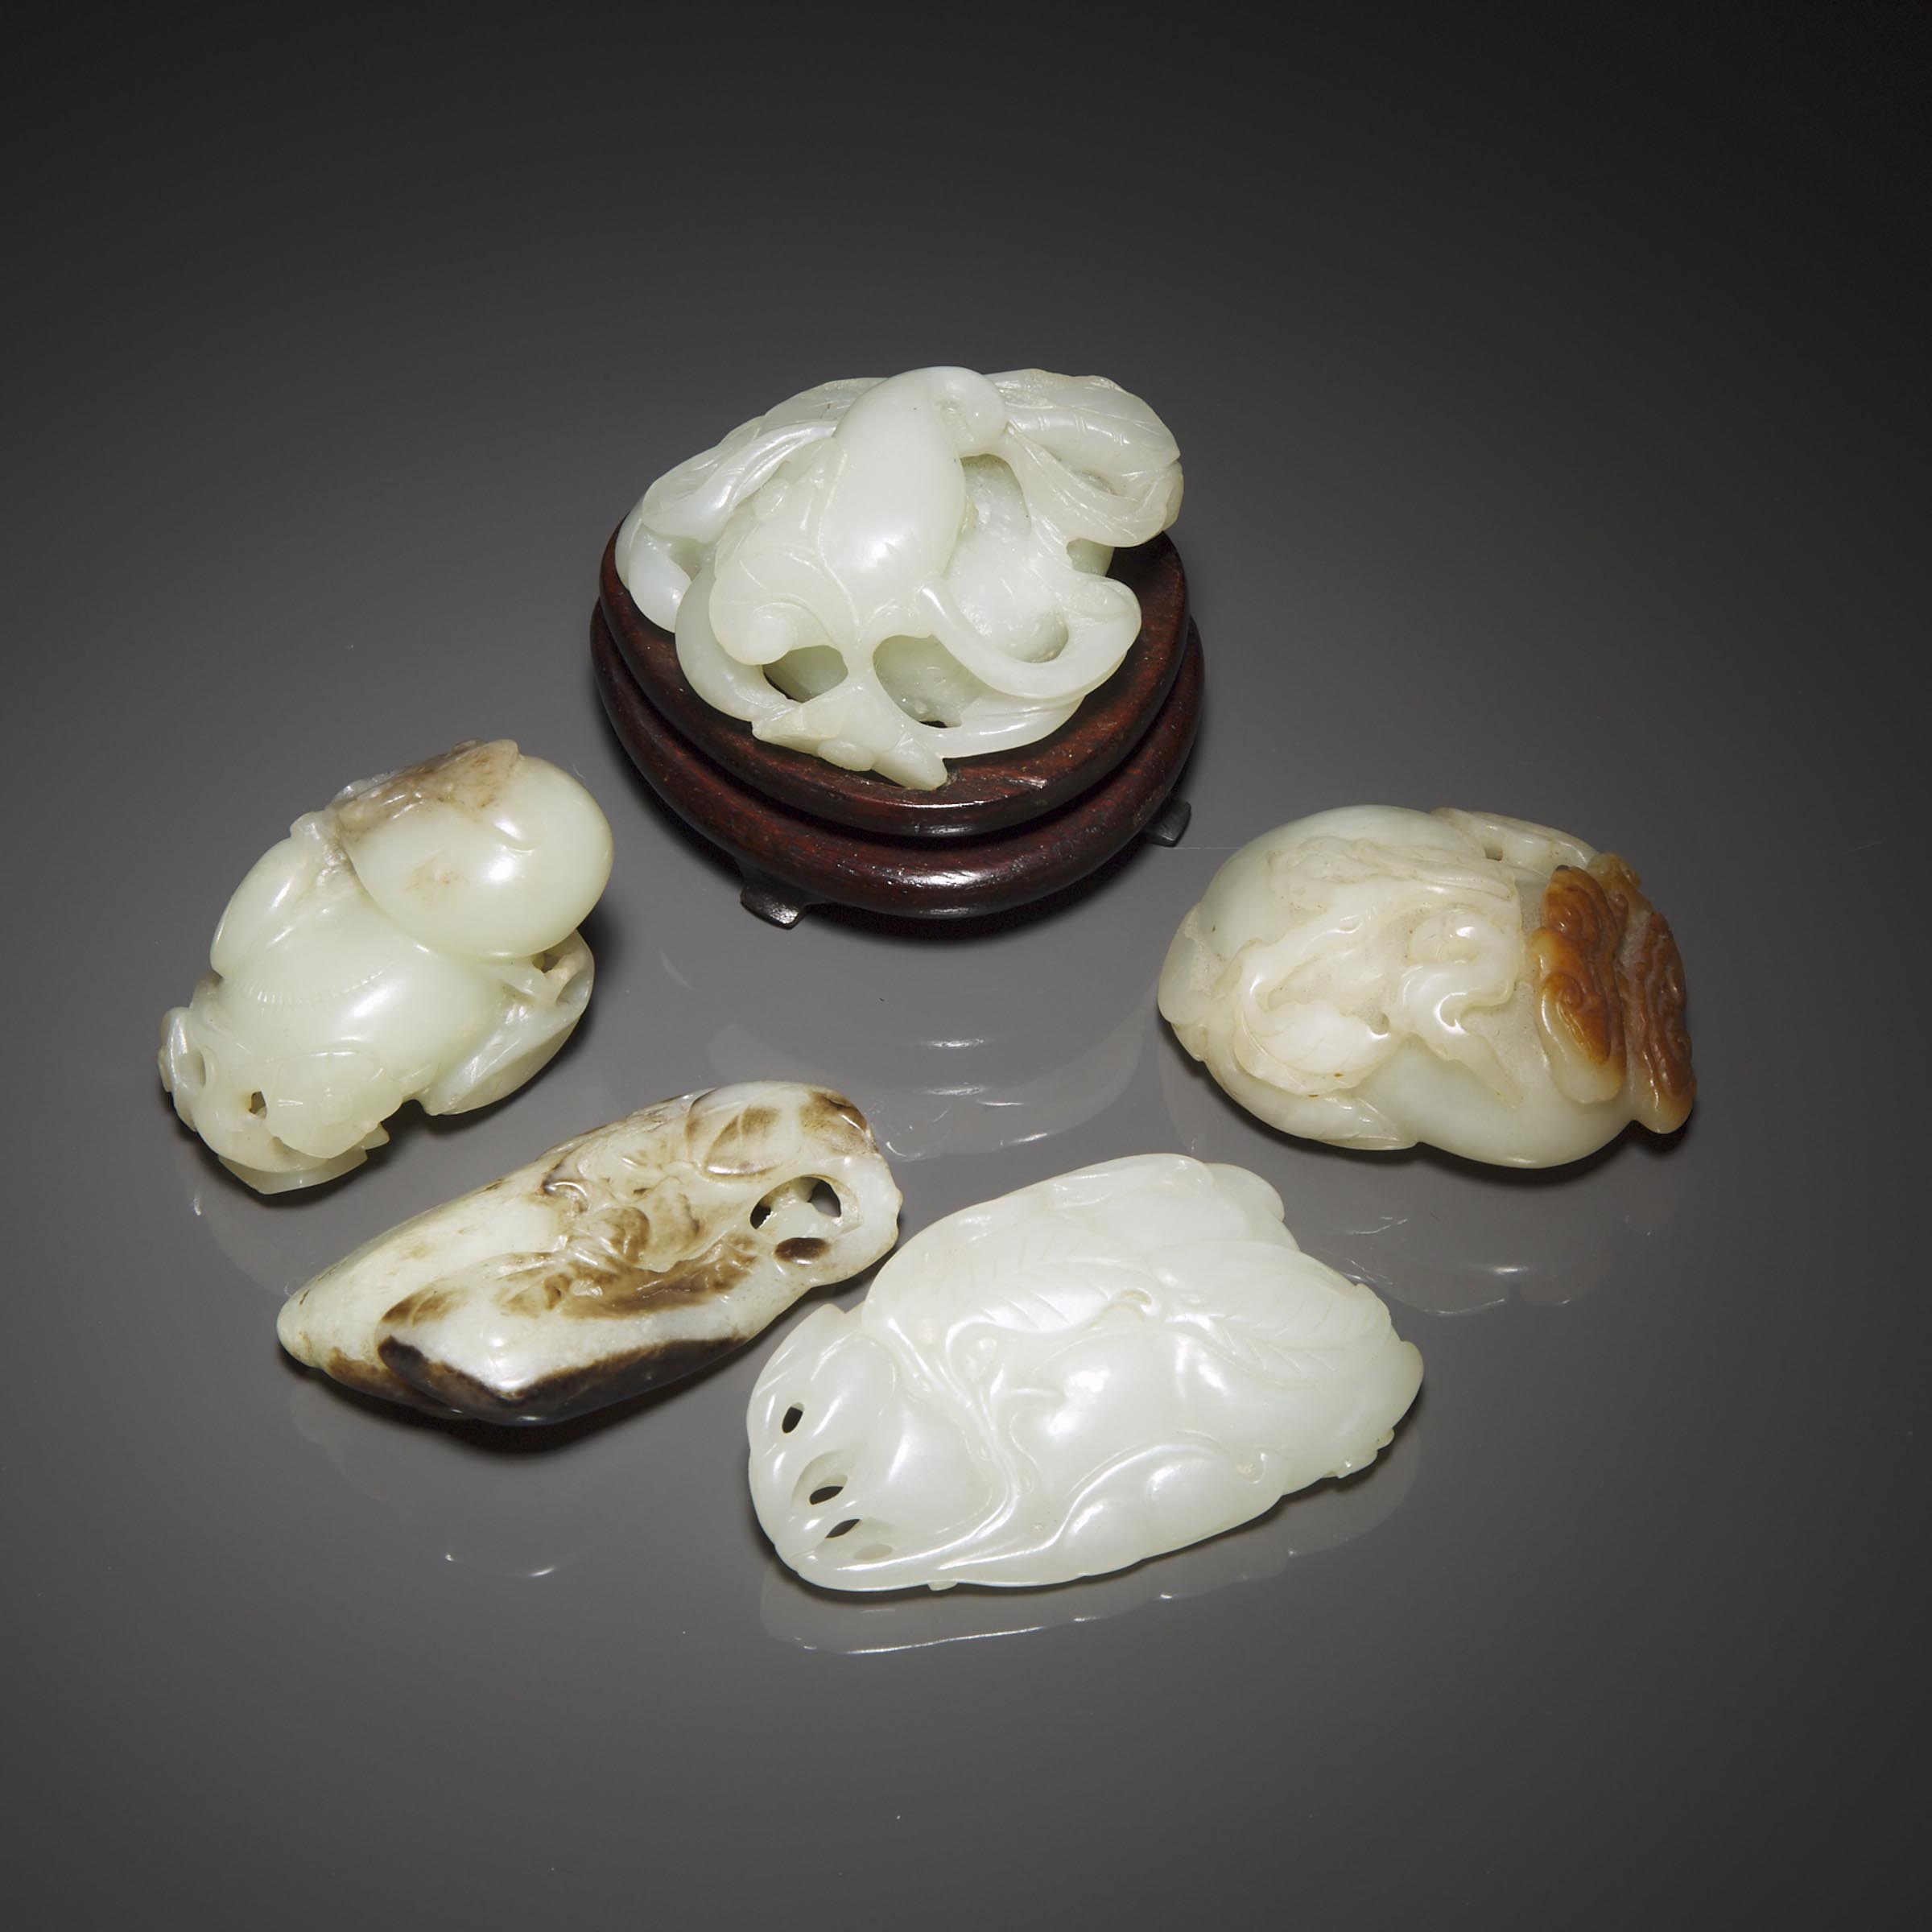 A Group of Five White and Russet Jade Carvings, Qing Dynasty